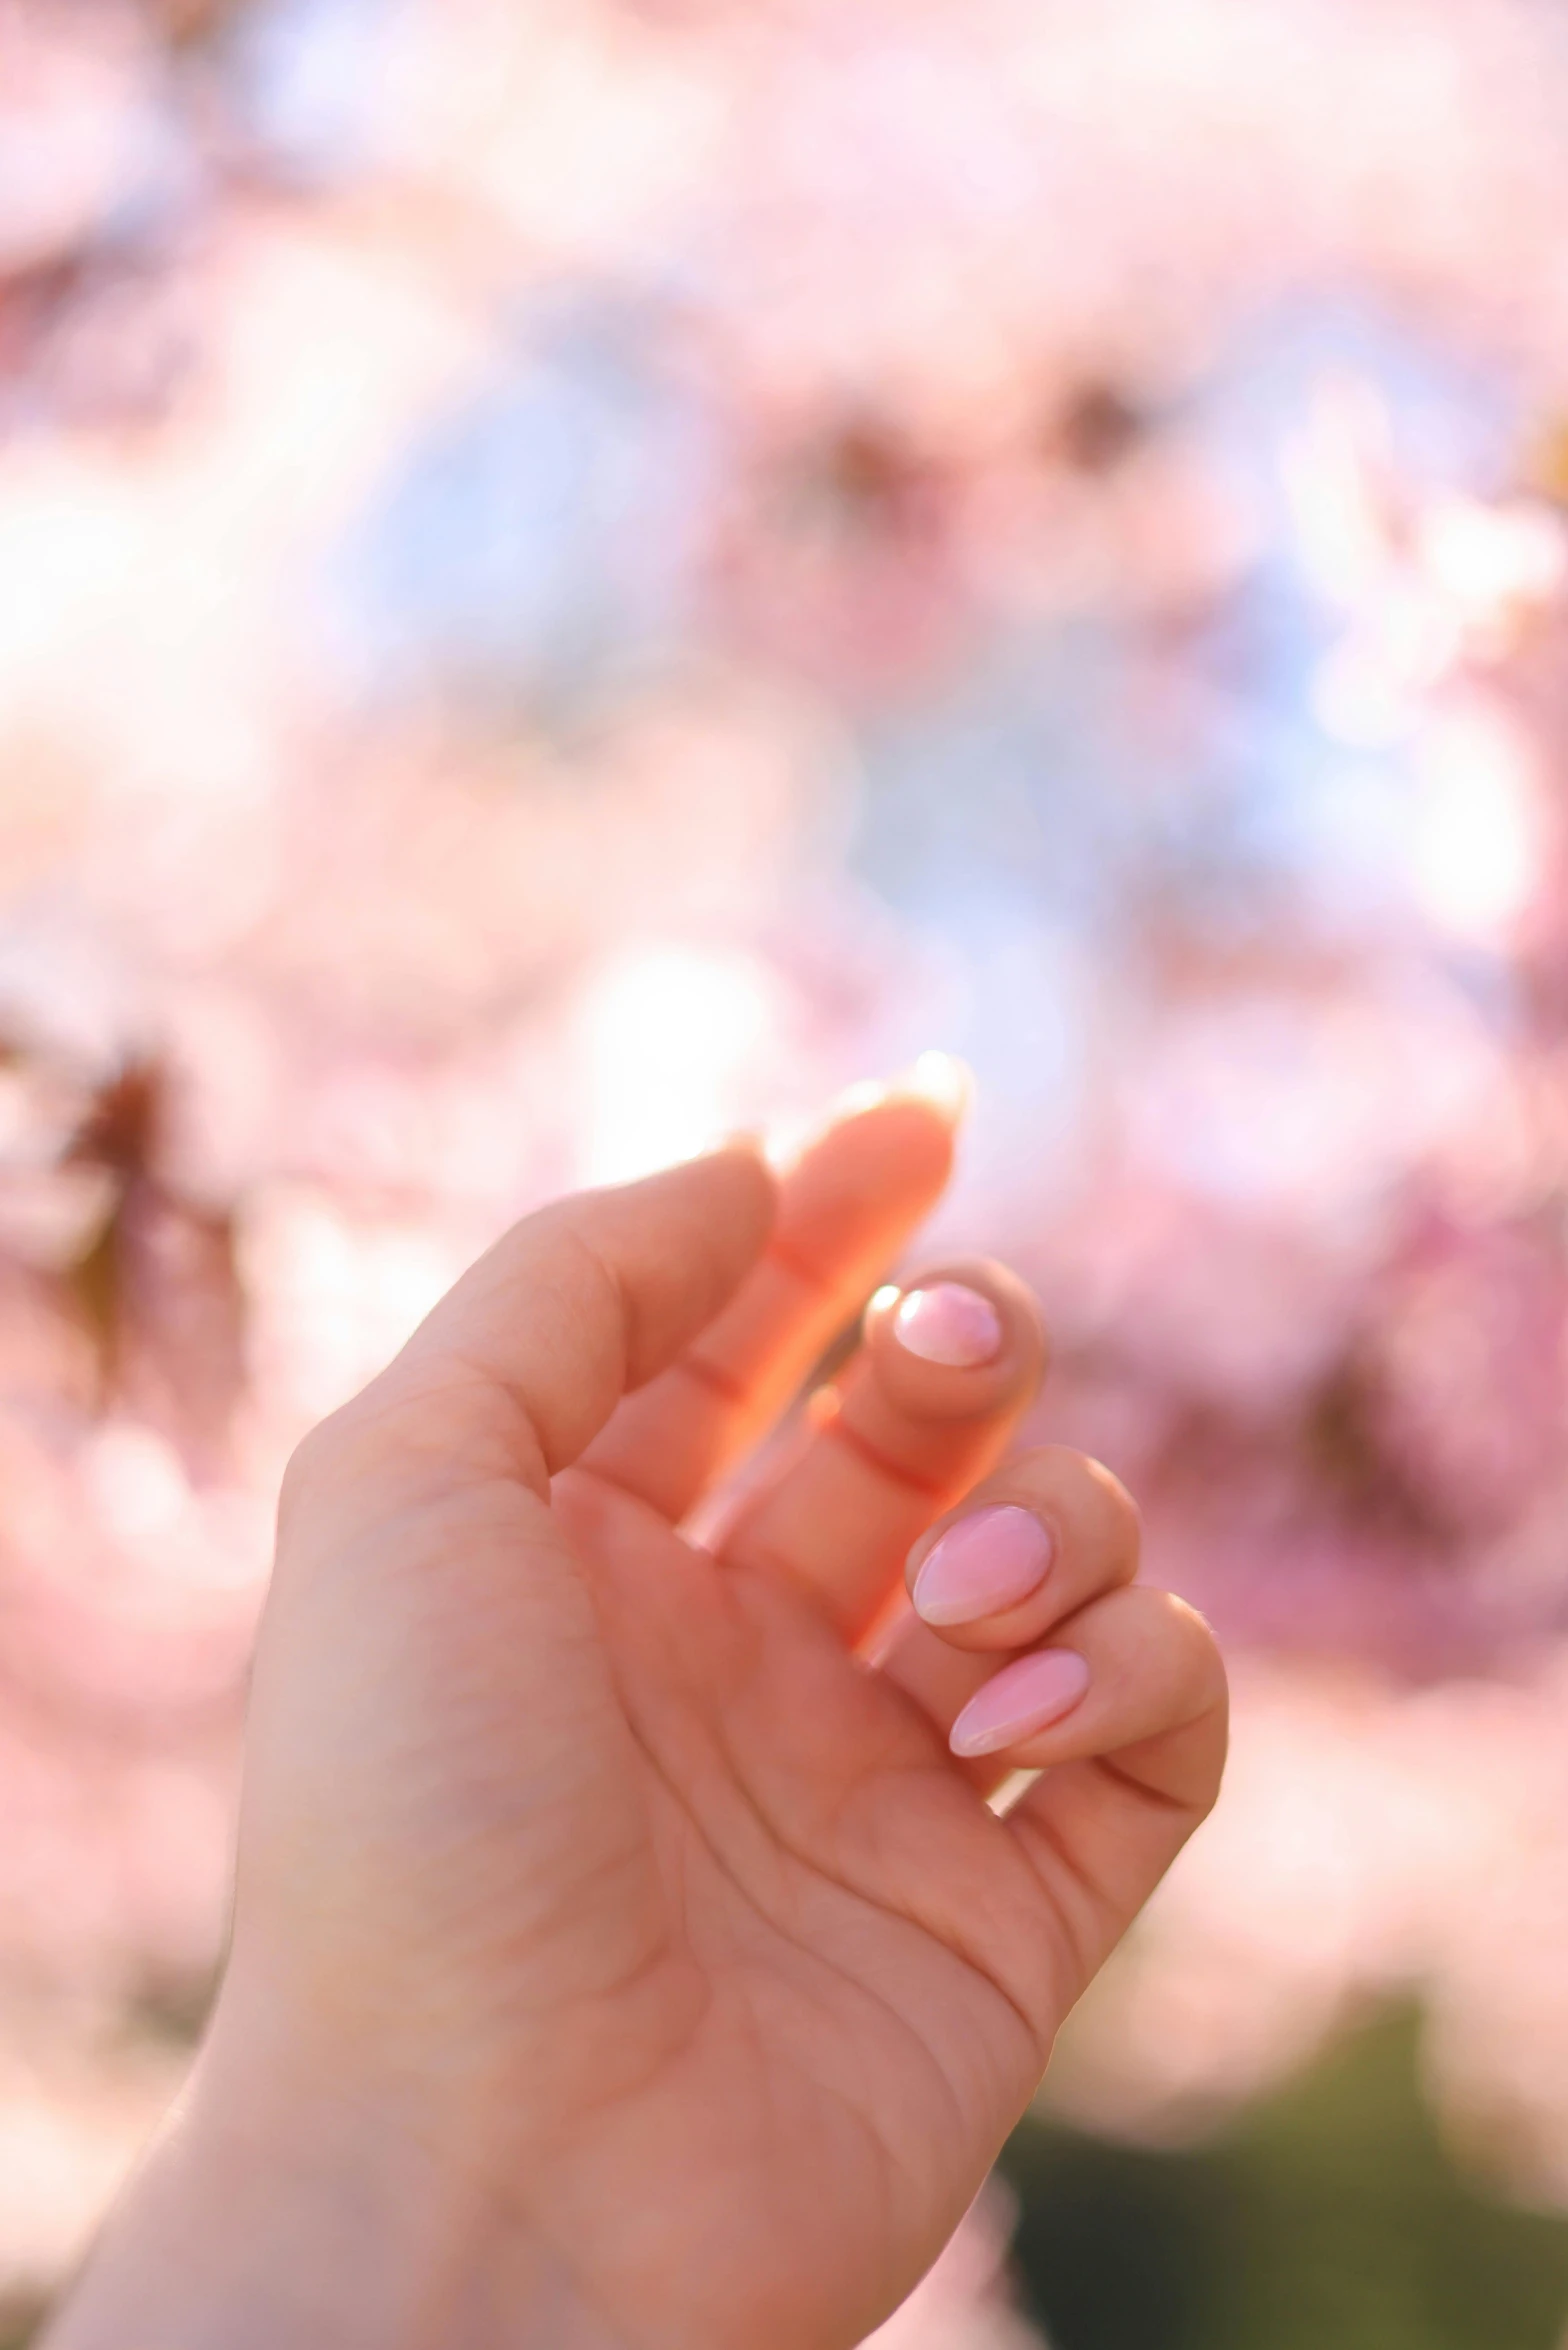 a womans hand with pink nail polish and nails holding a yellow rose